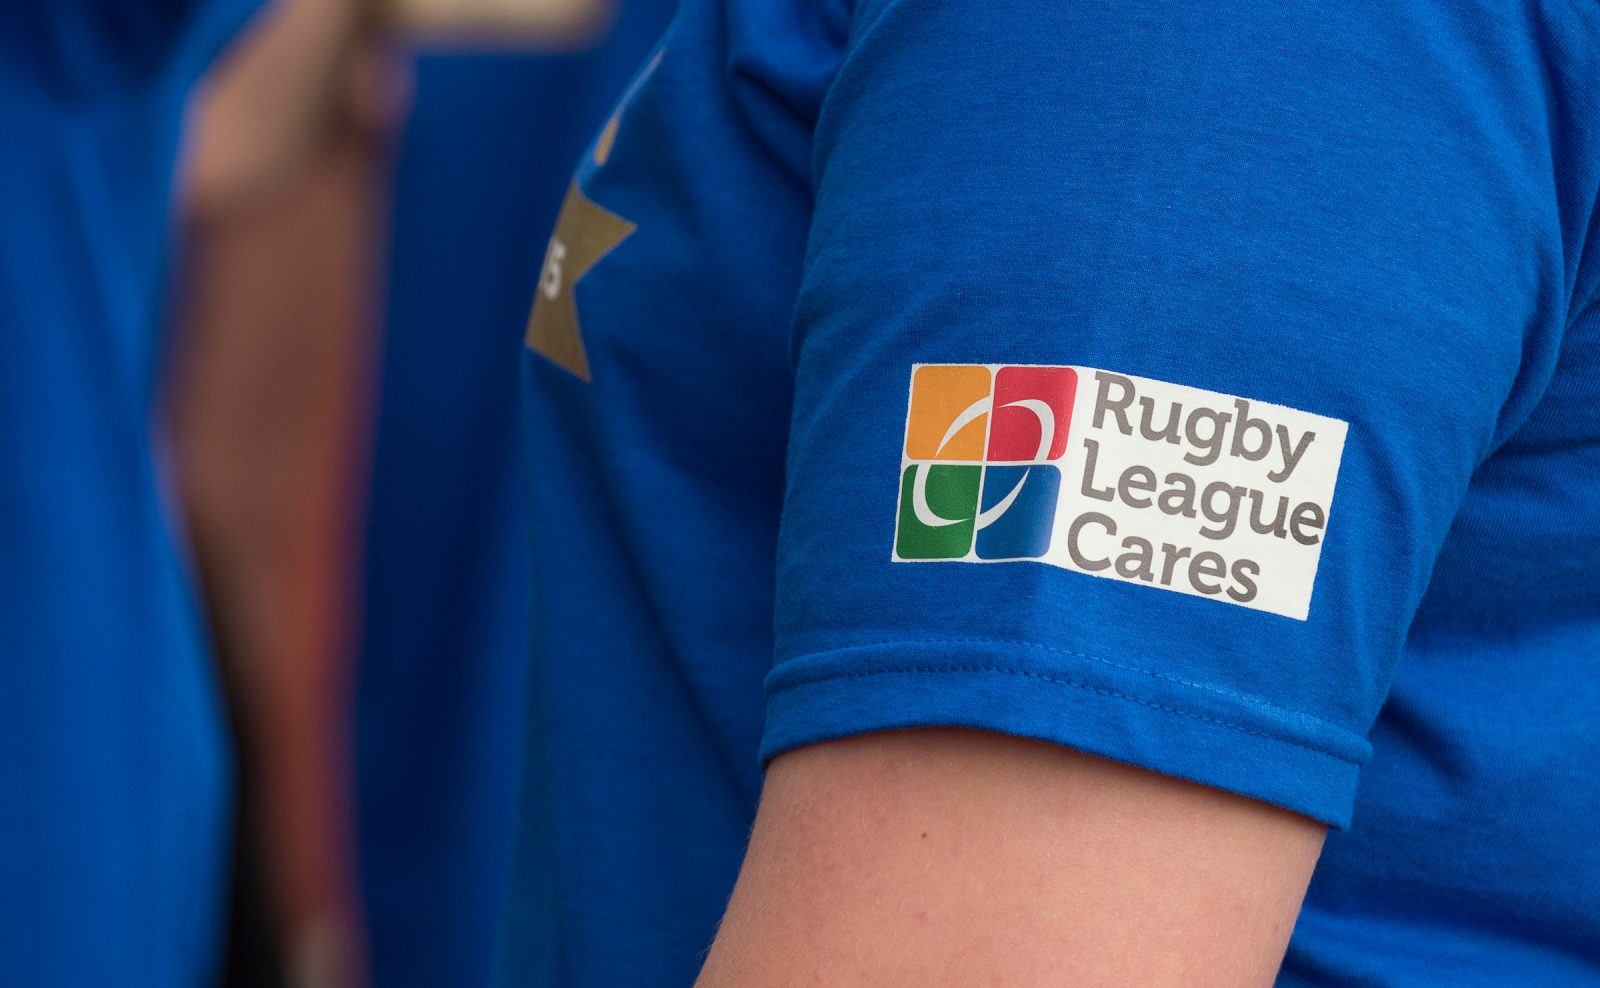 Rugby League Cares statement